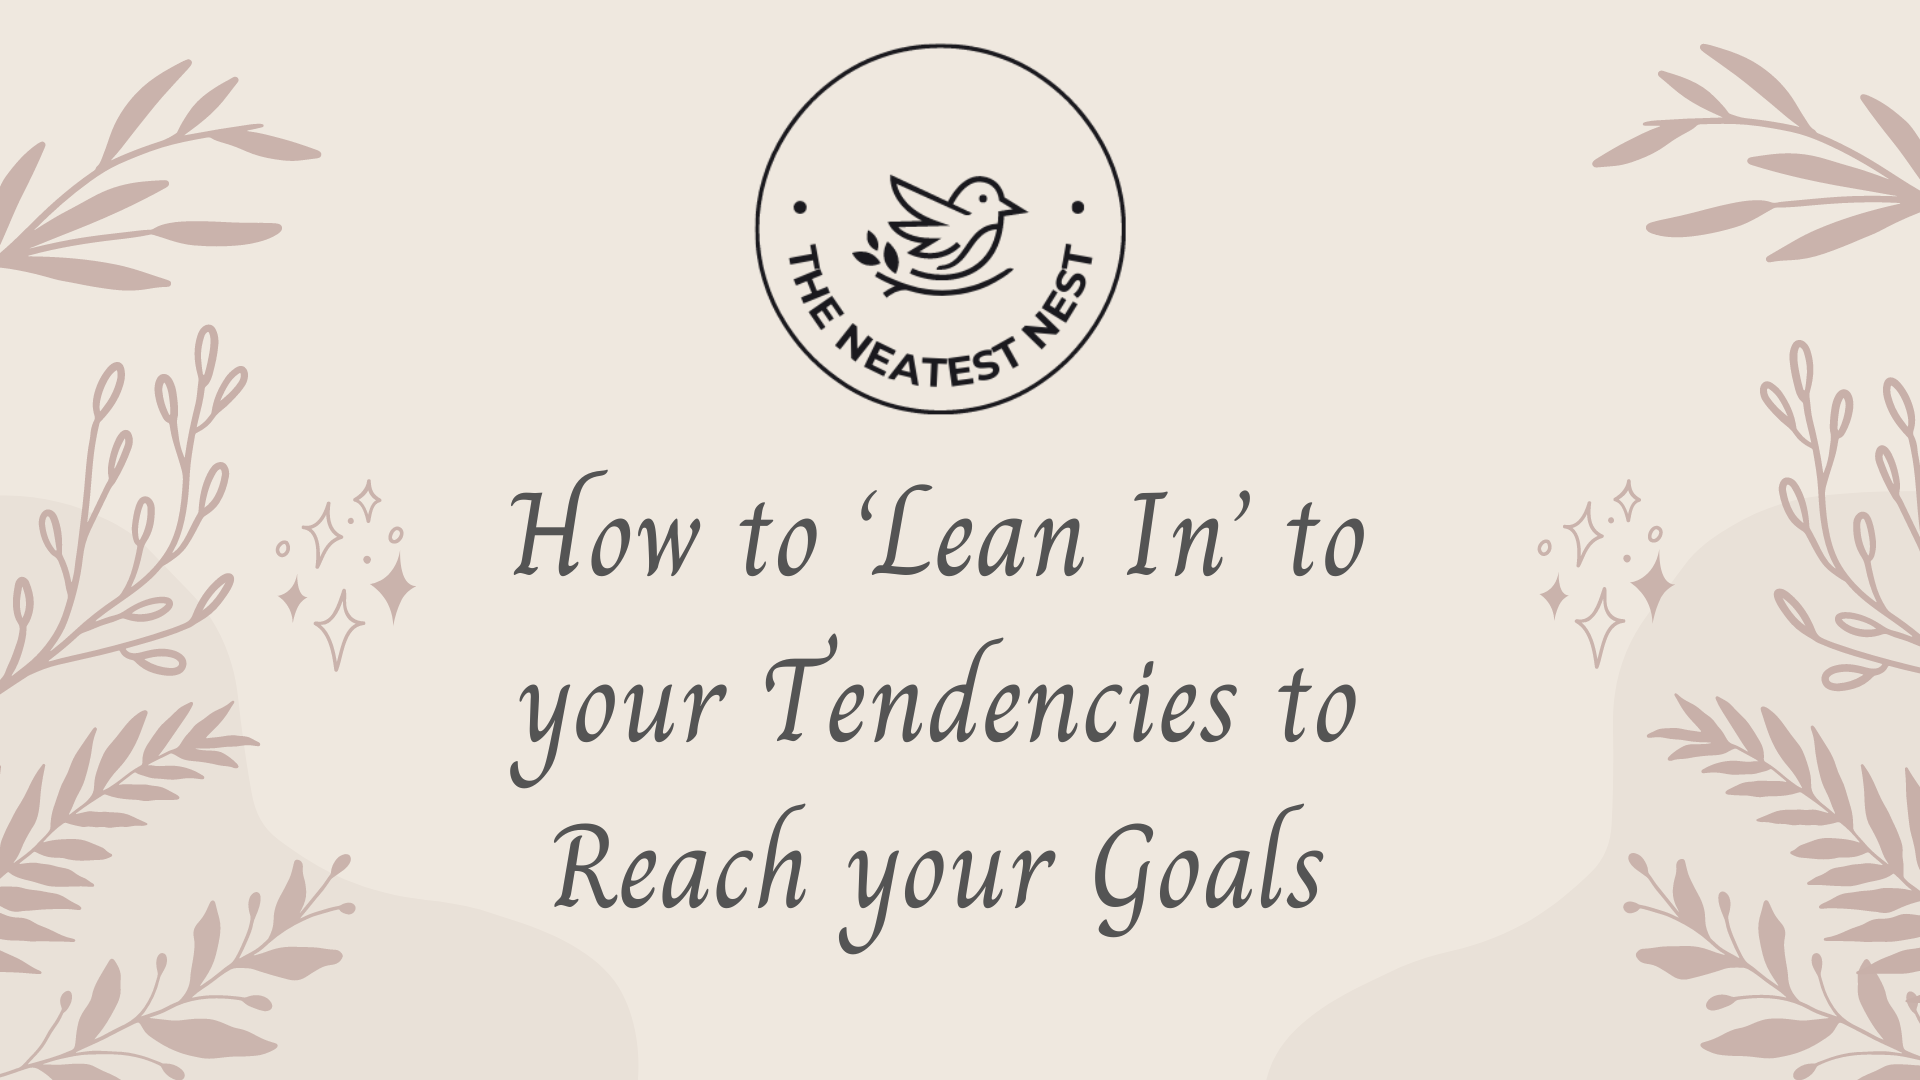 How to ‘Lean In’ to Your Tendencies to Reach Your Goals